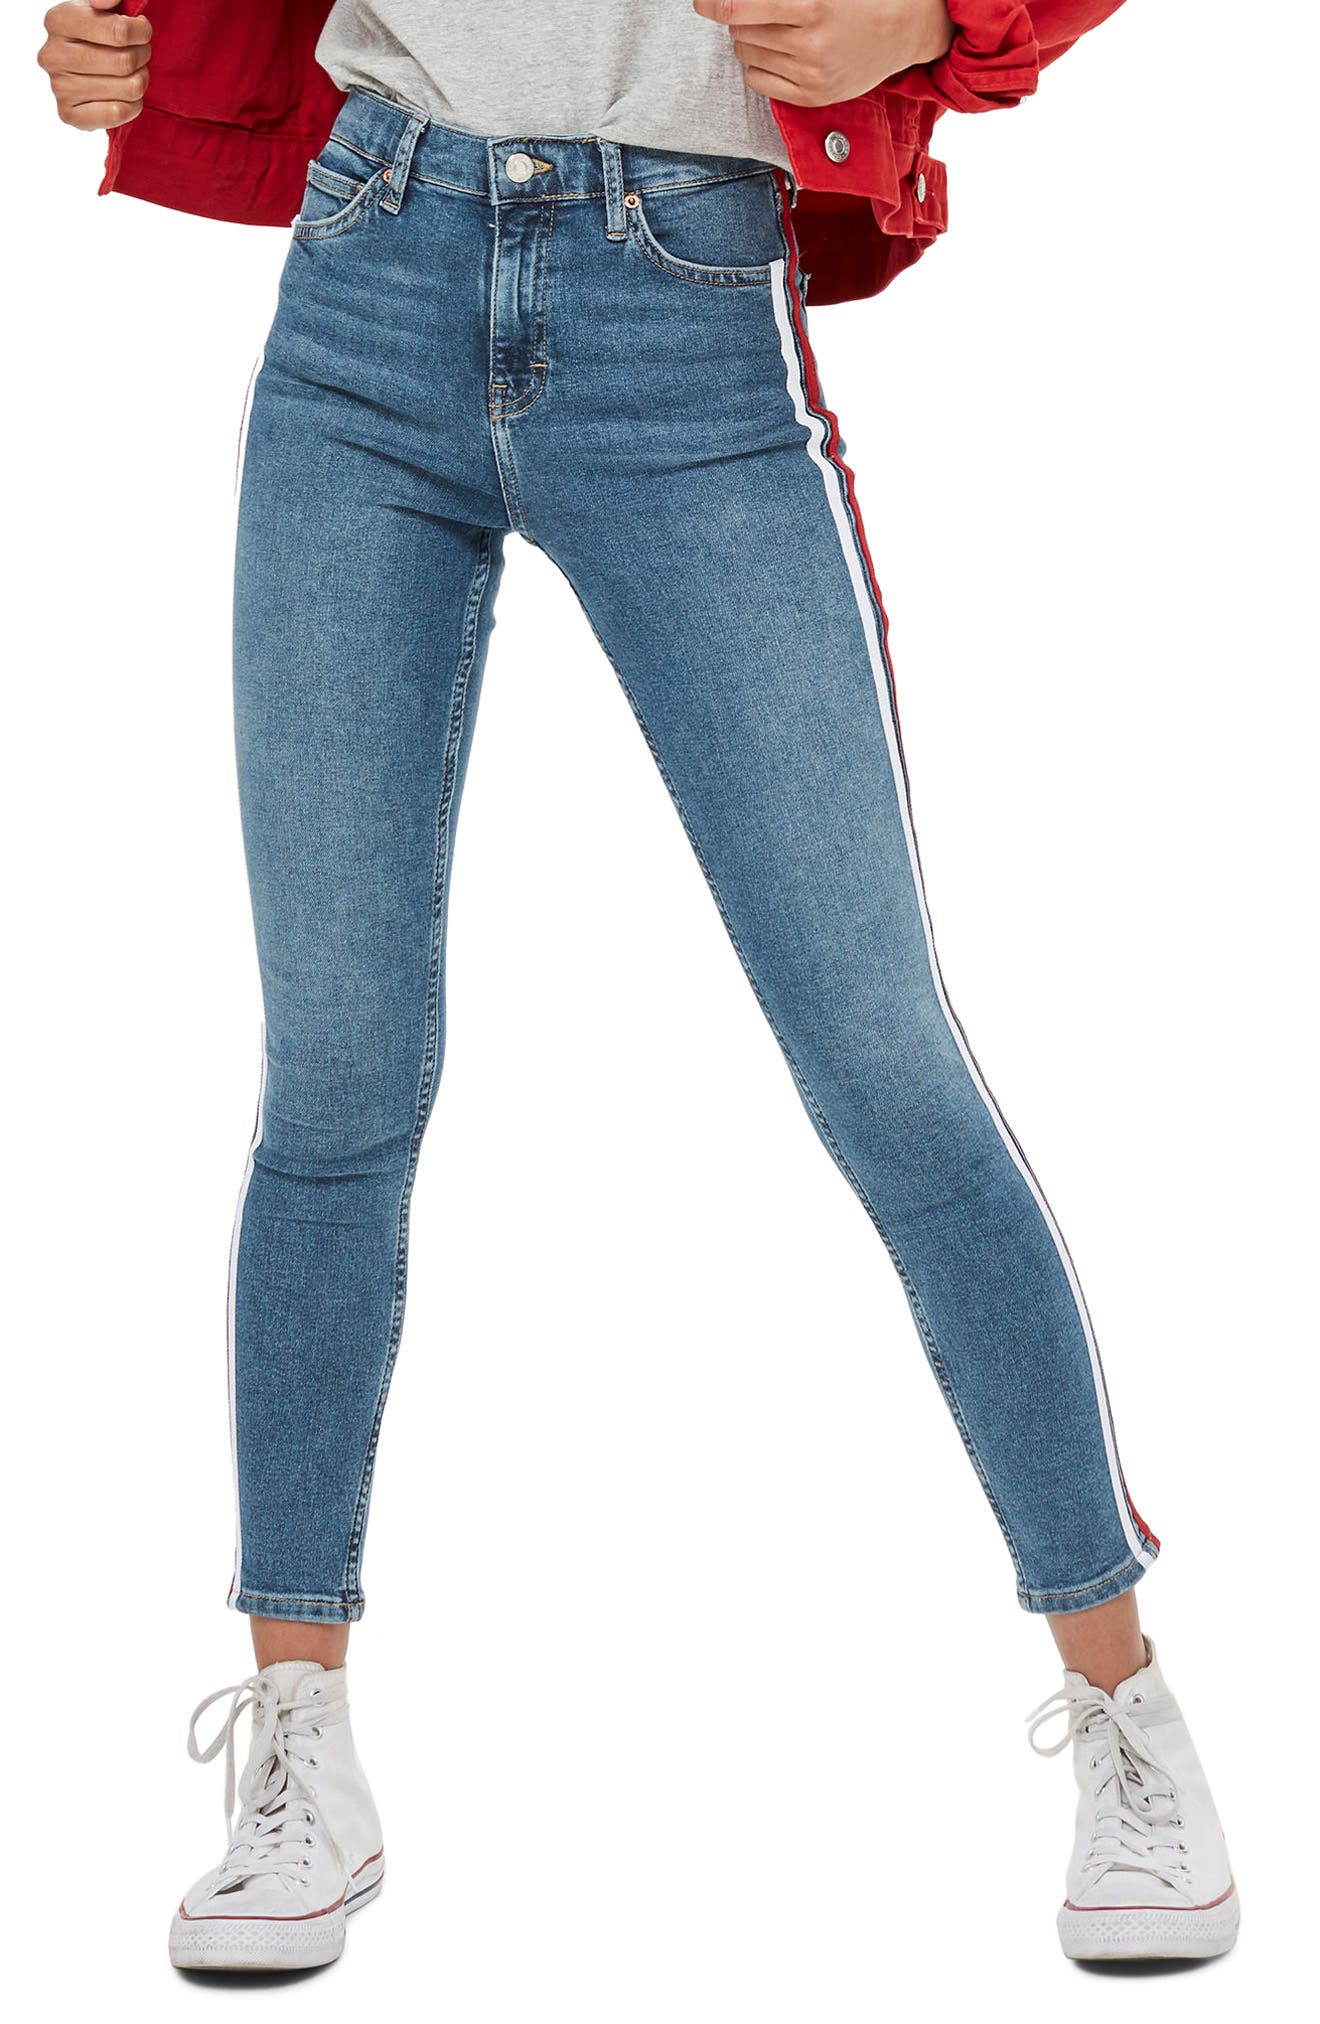 jeans with stripe down the side